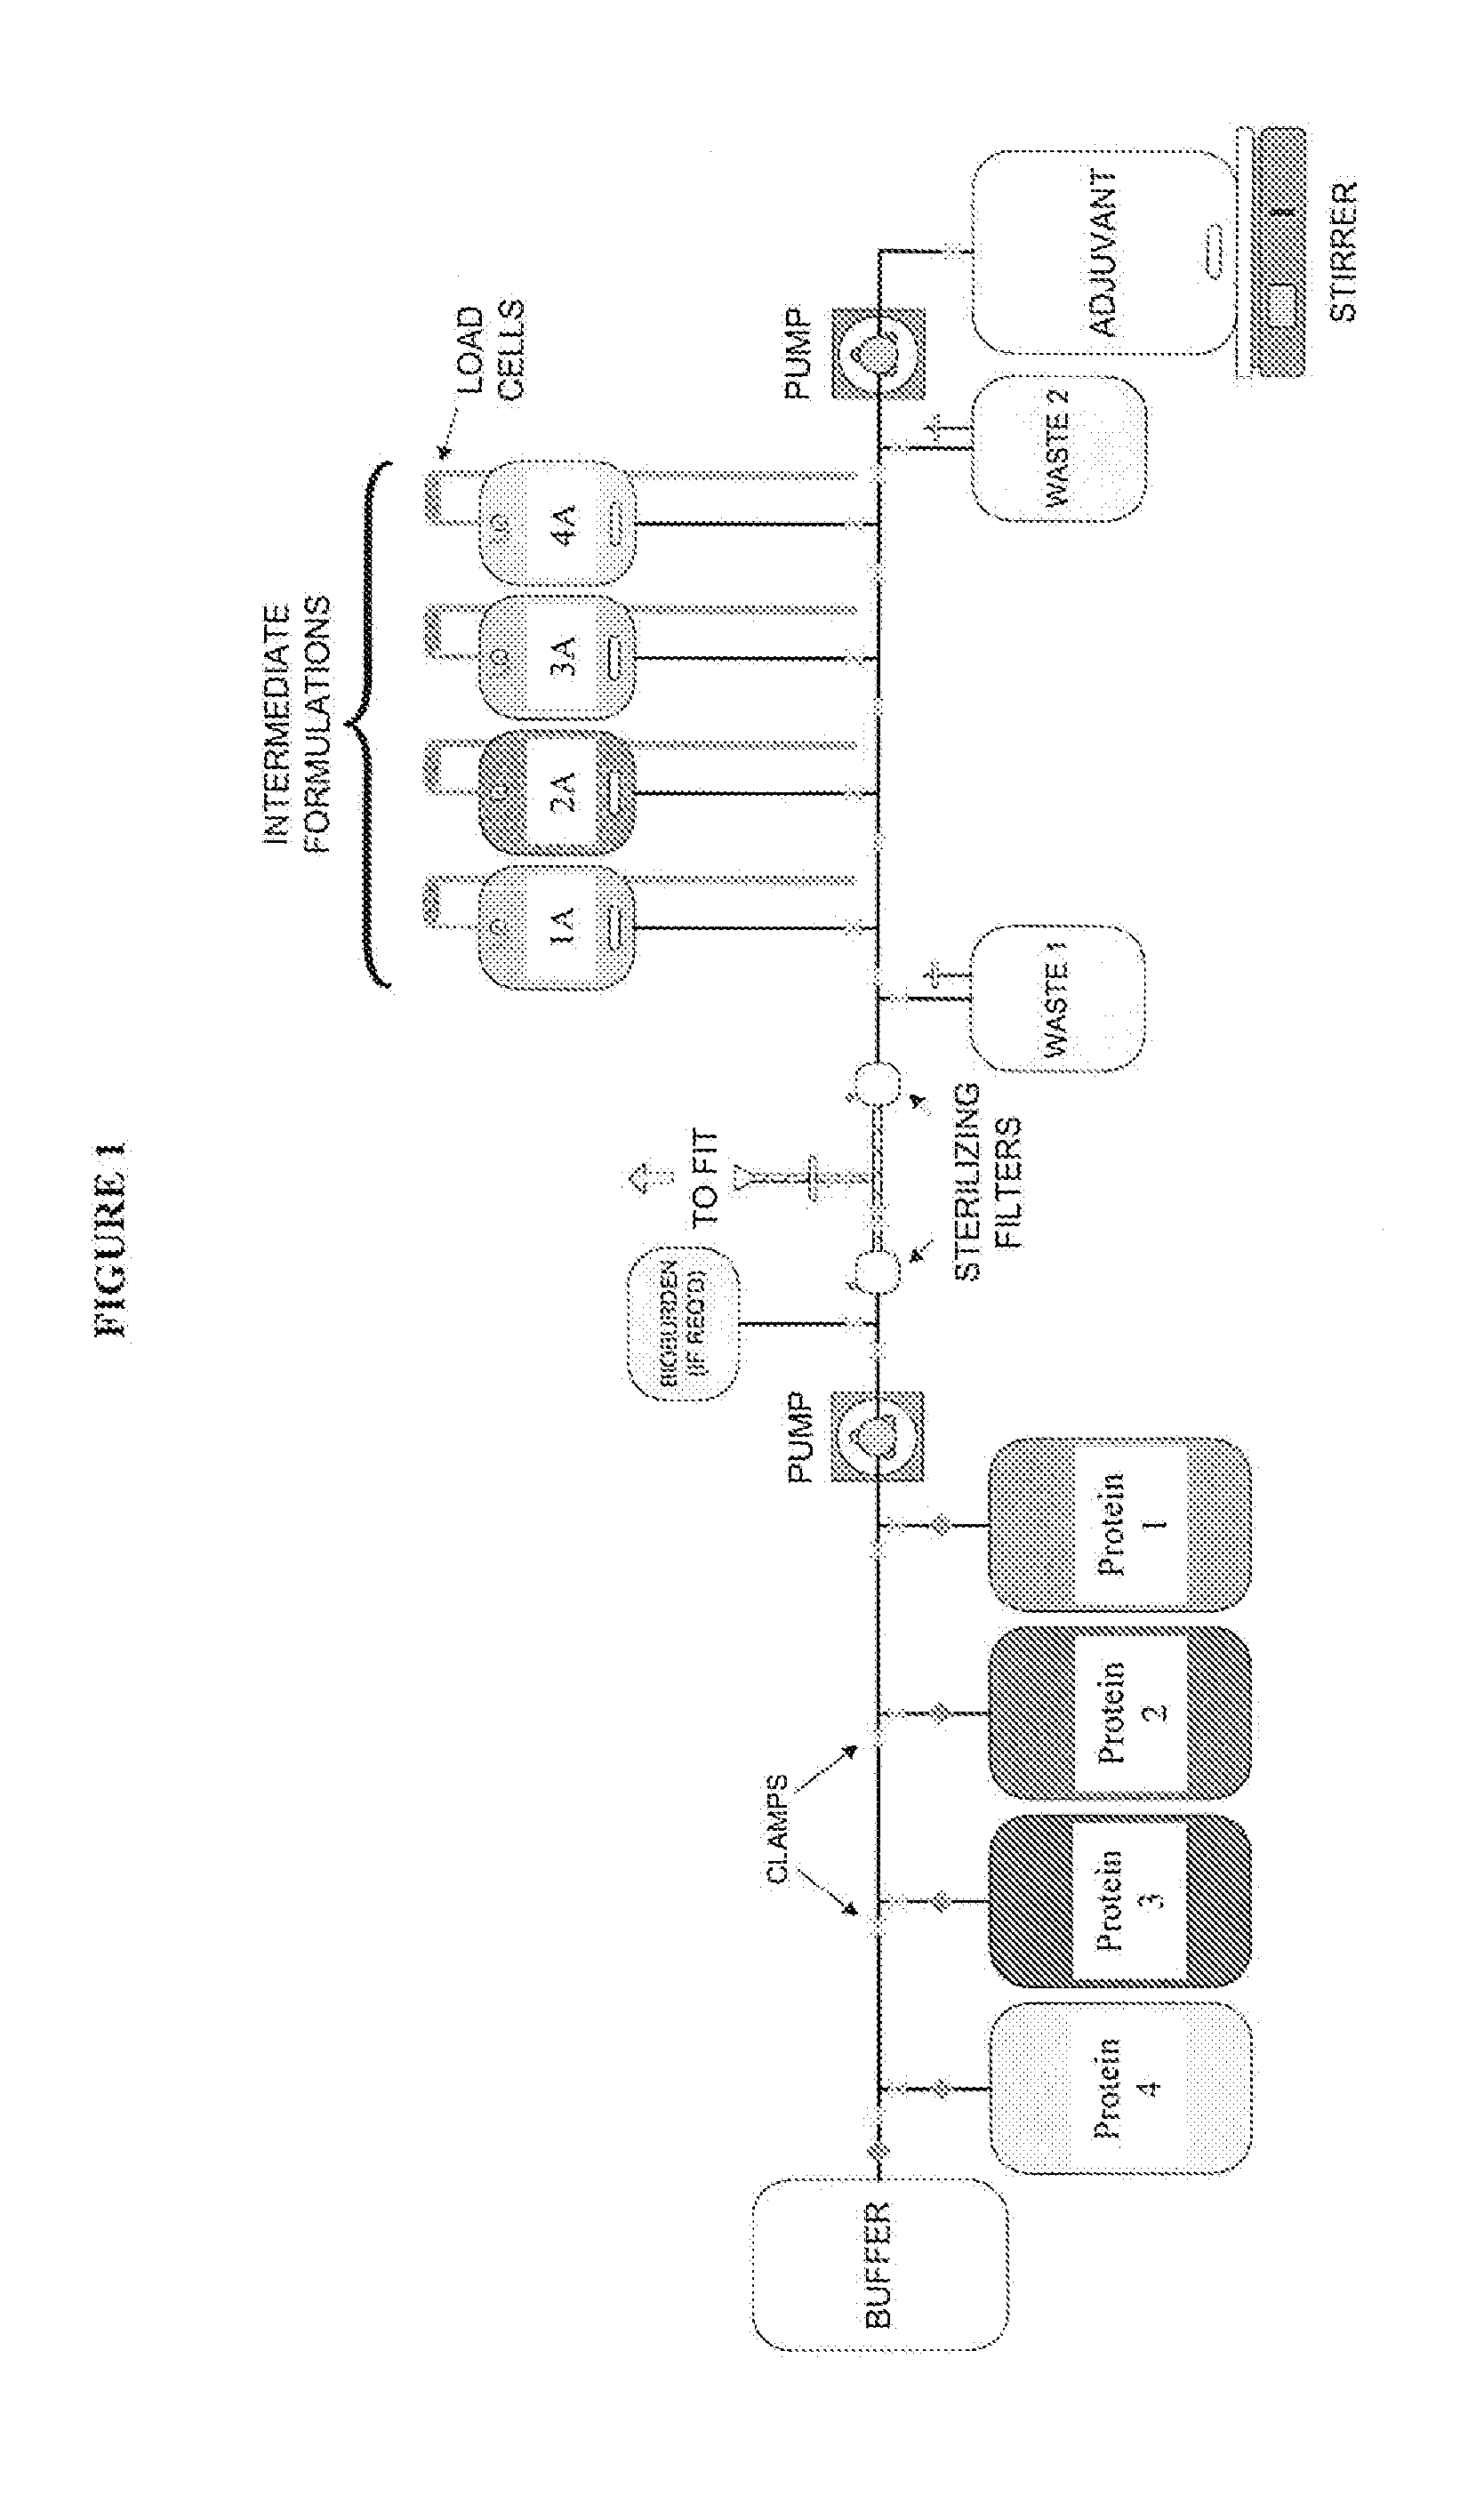 System and Process for Producing Mulit-Component Biopharmaceuticals